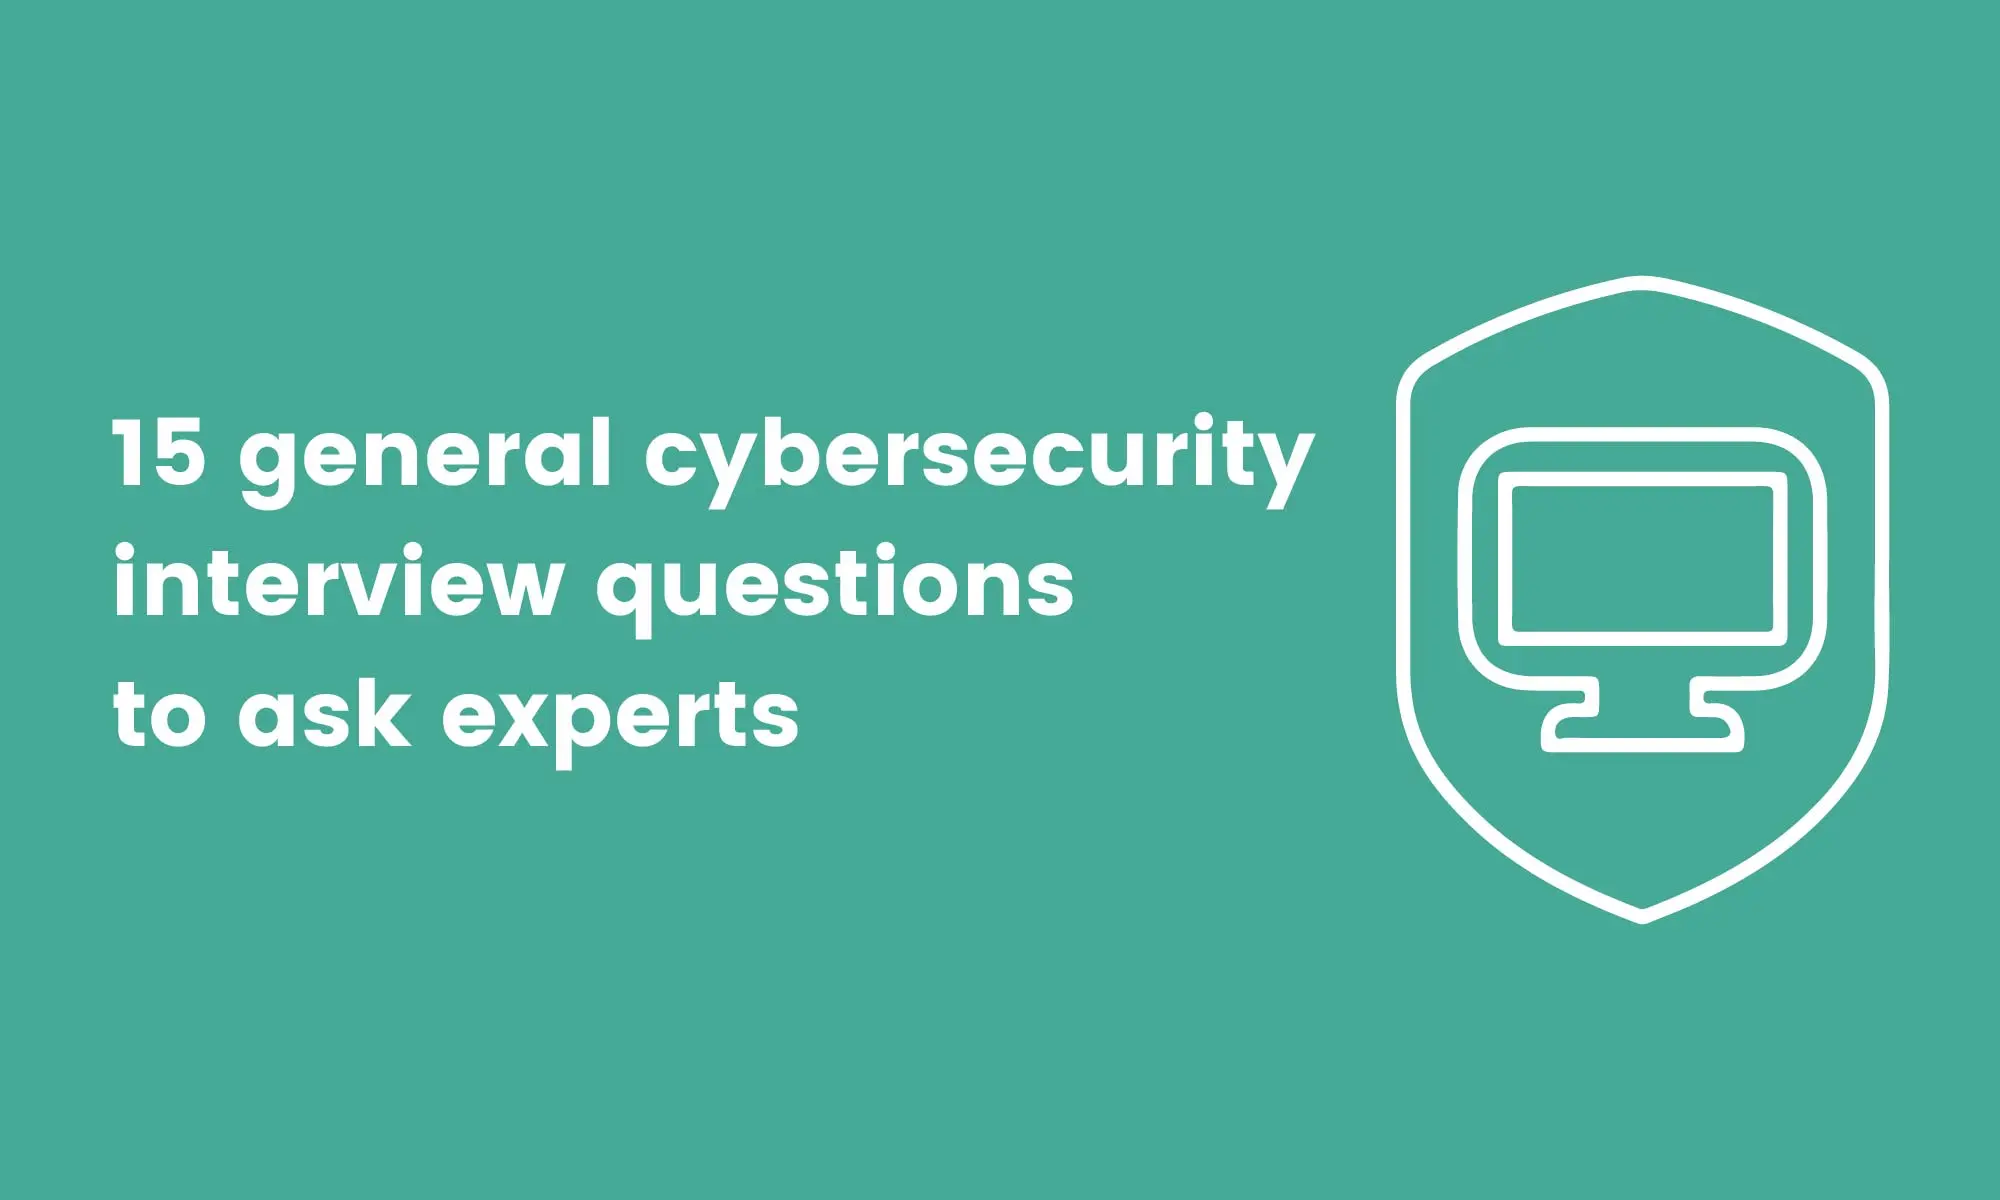 15 general cybersecurity interview questions